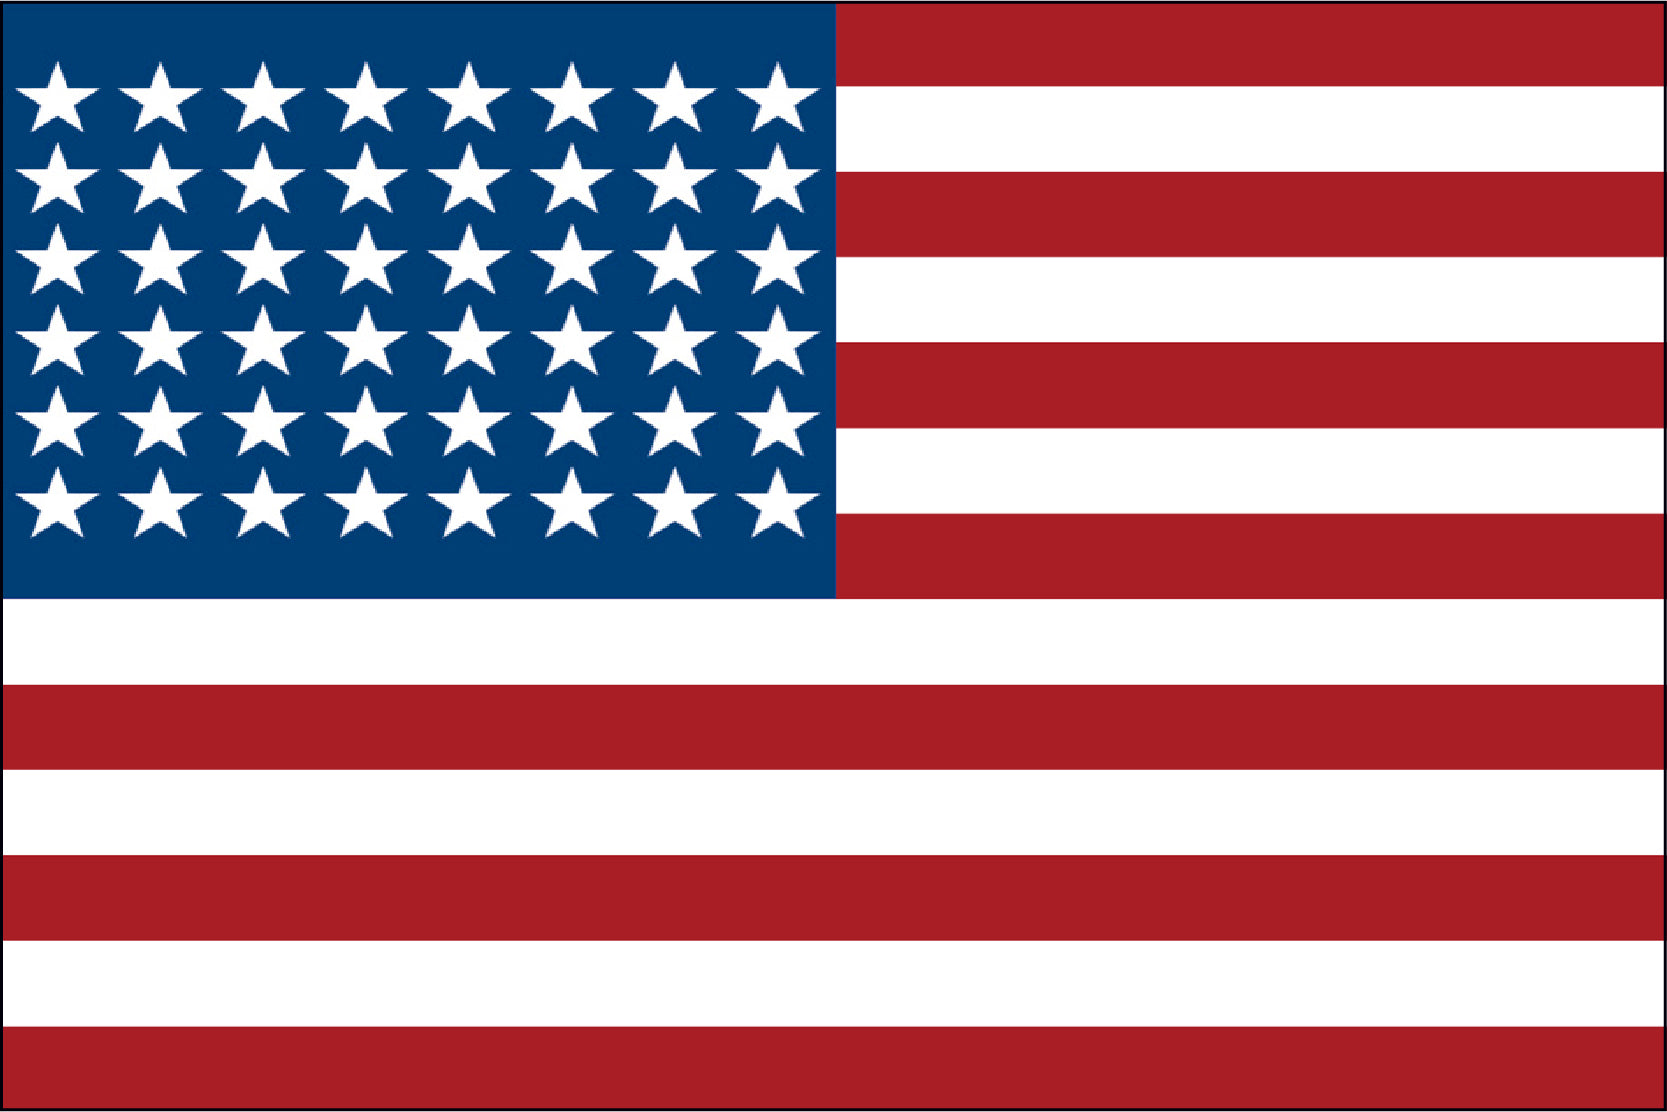 48 Star Old Glory Flag - LEAD TIMES ARE CURRENTLY RUNNING 6-8 WEEKS